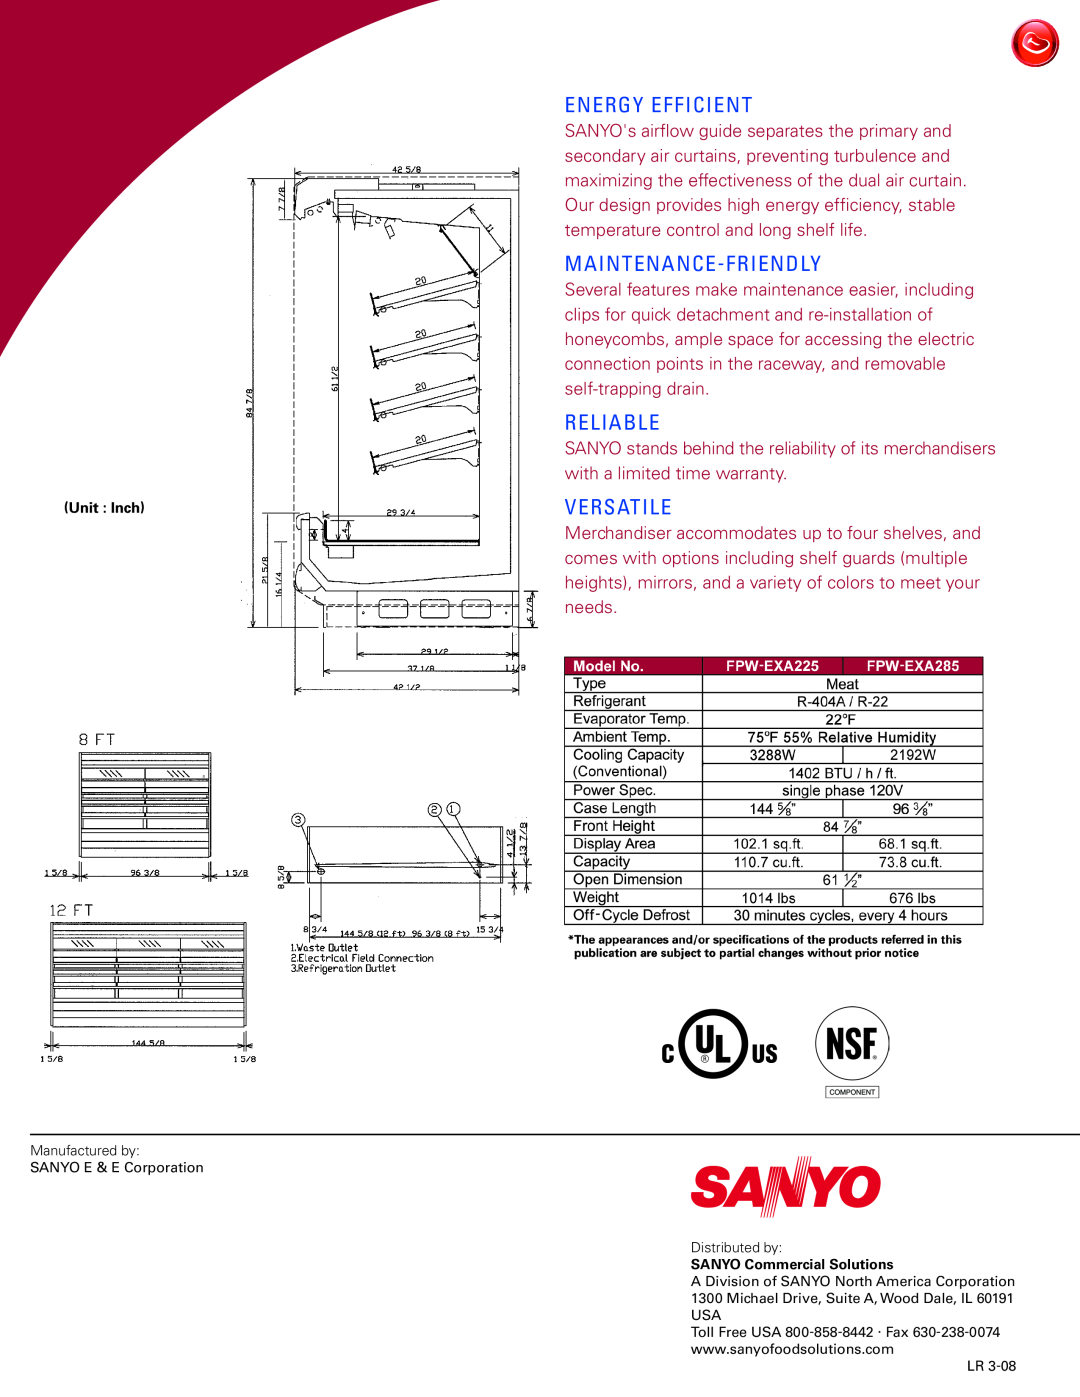 Sanyo FPW-EXA225 manual Energy Efficient, Maintenance-Friendly, Reliable, Versatile, SANYO Commercial Solutions 